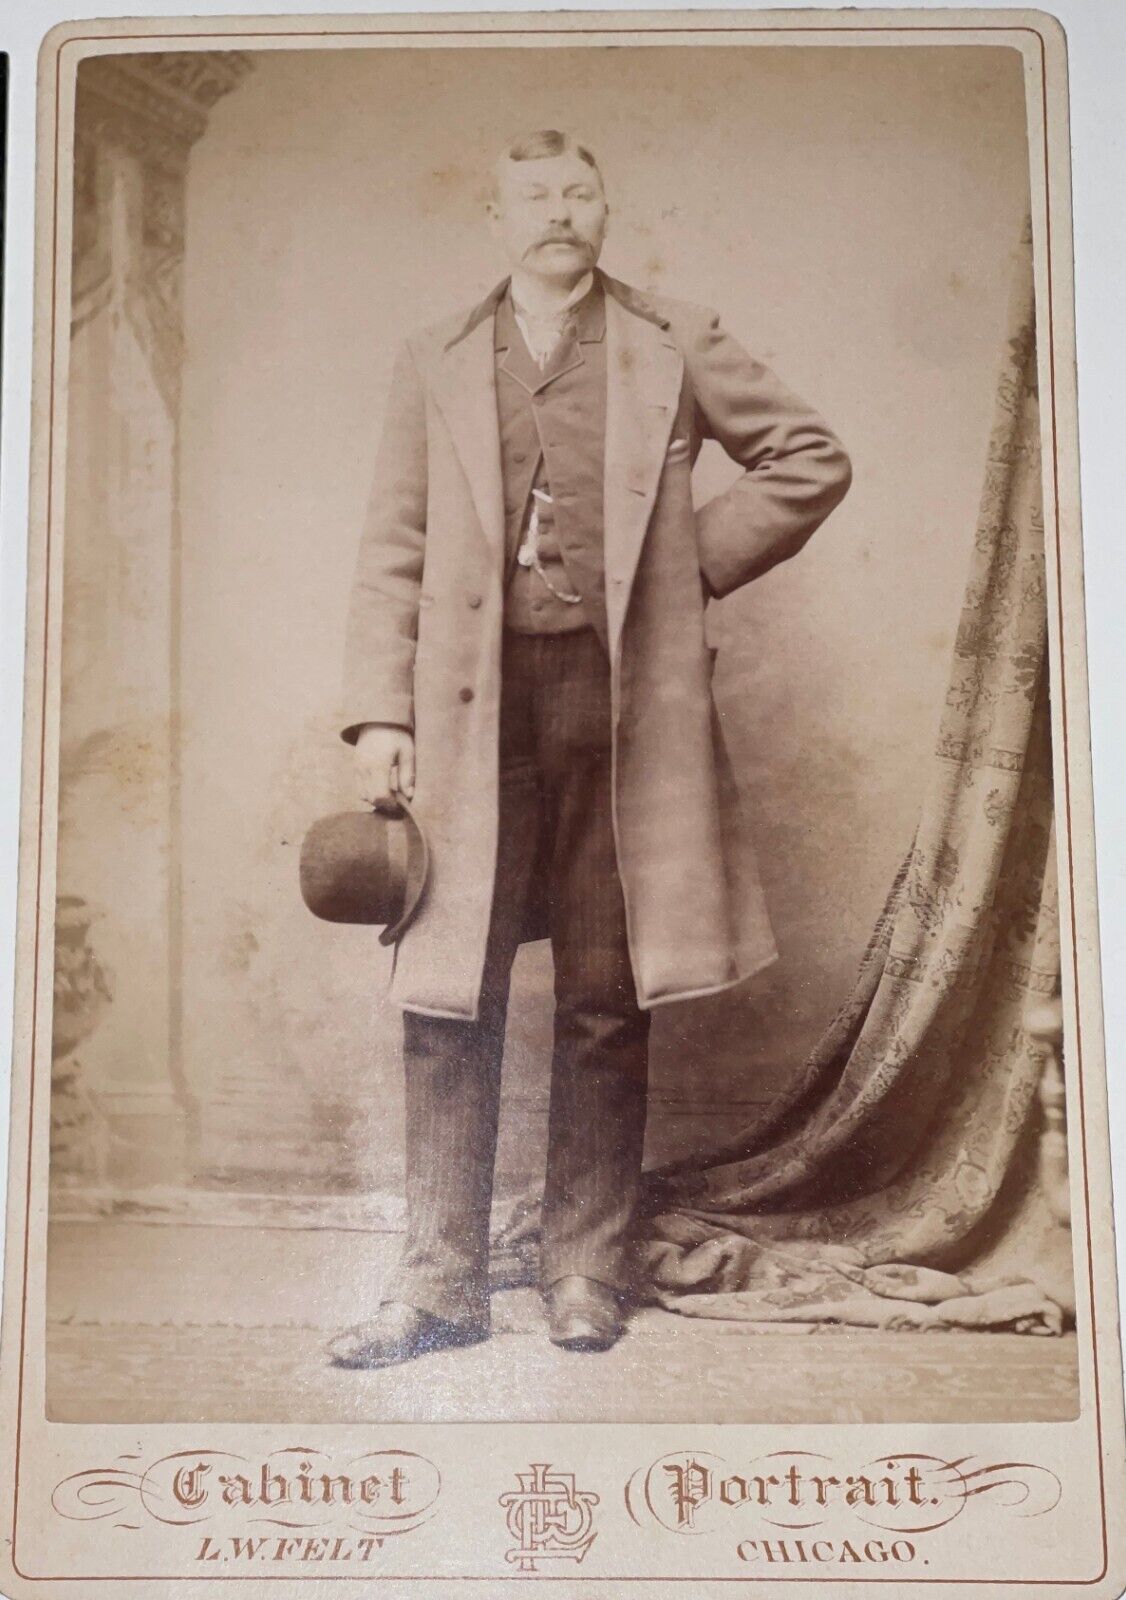 RARE c.1880's CABINET CARD MAN WITH BOWLER DERBY HAT L.W. FELT PHOTO CHICAGO ILL